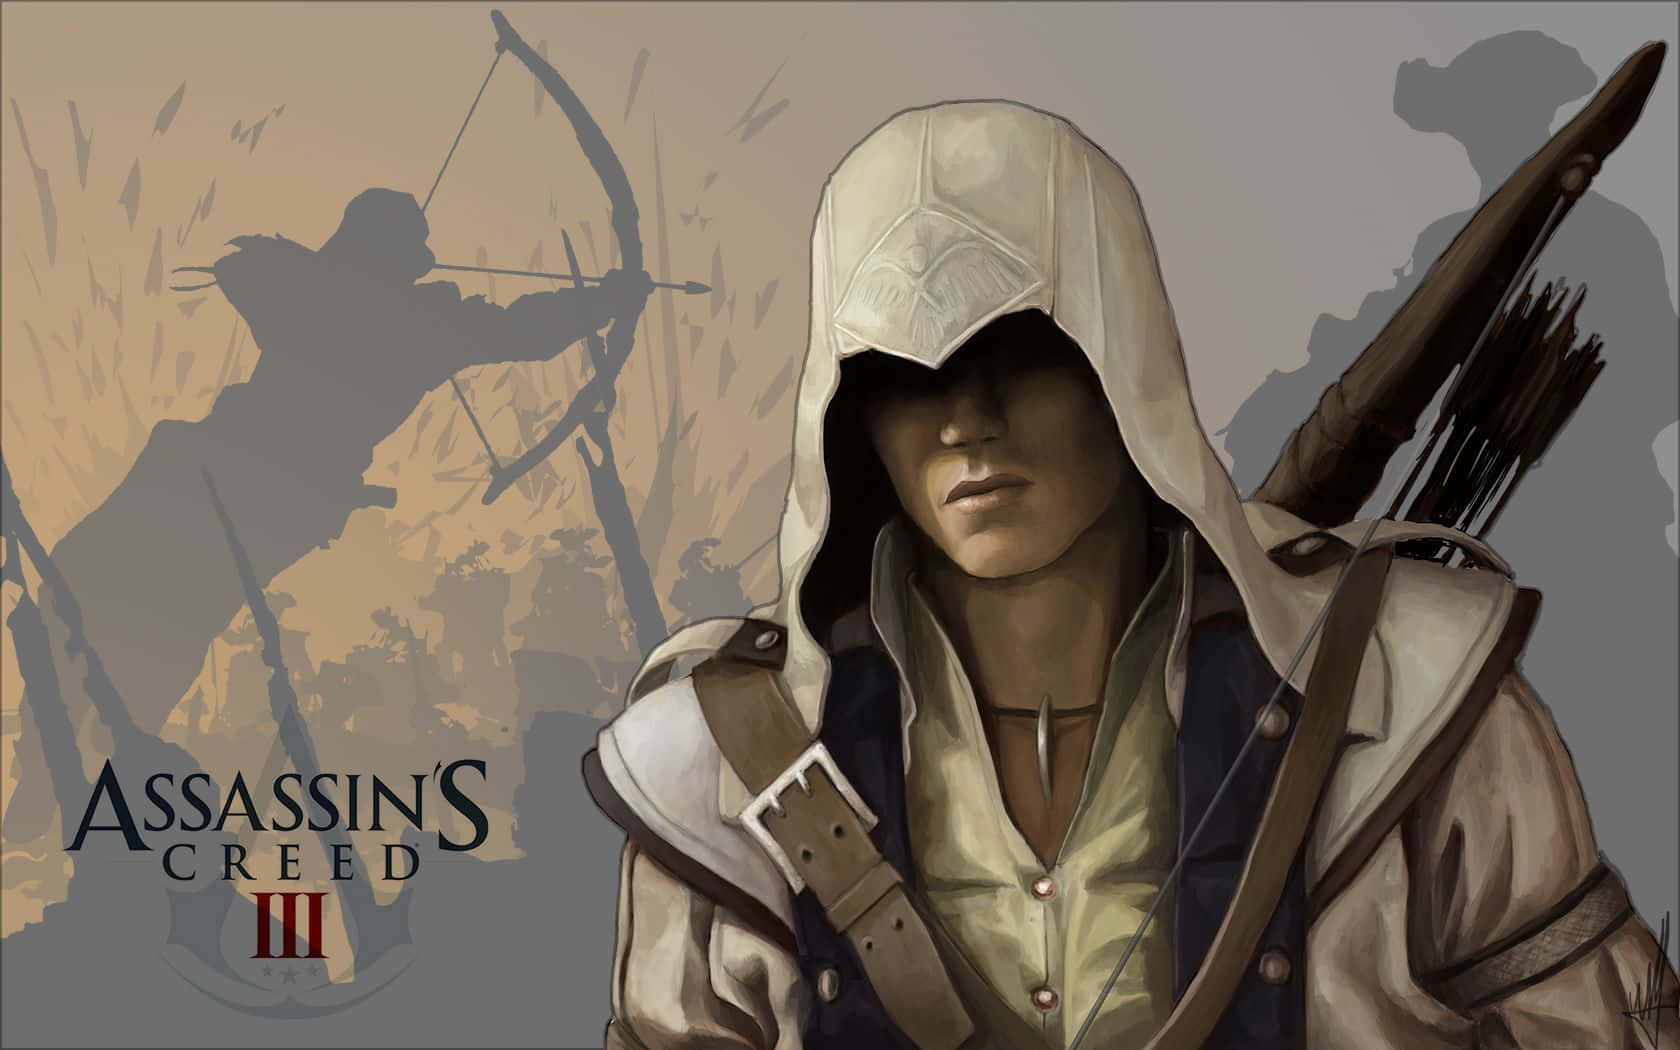 Connor Kenway, the fierce Assassin from Assassin's Creed III, standing strong in the wild. Wallpaper